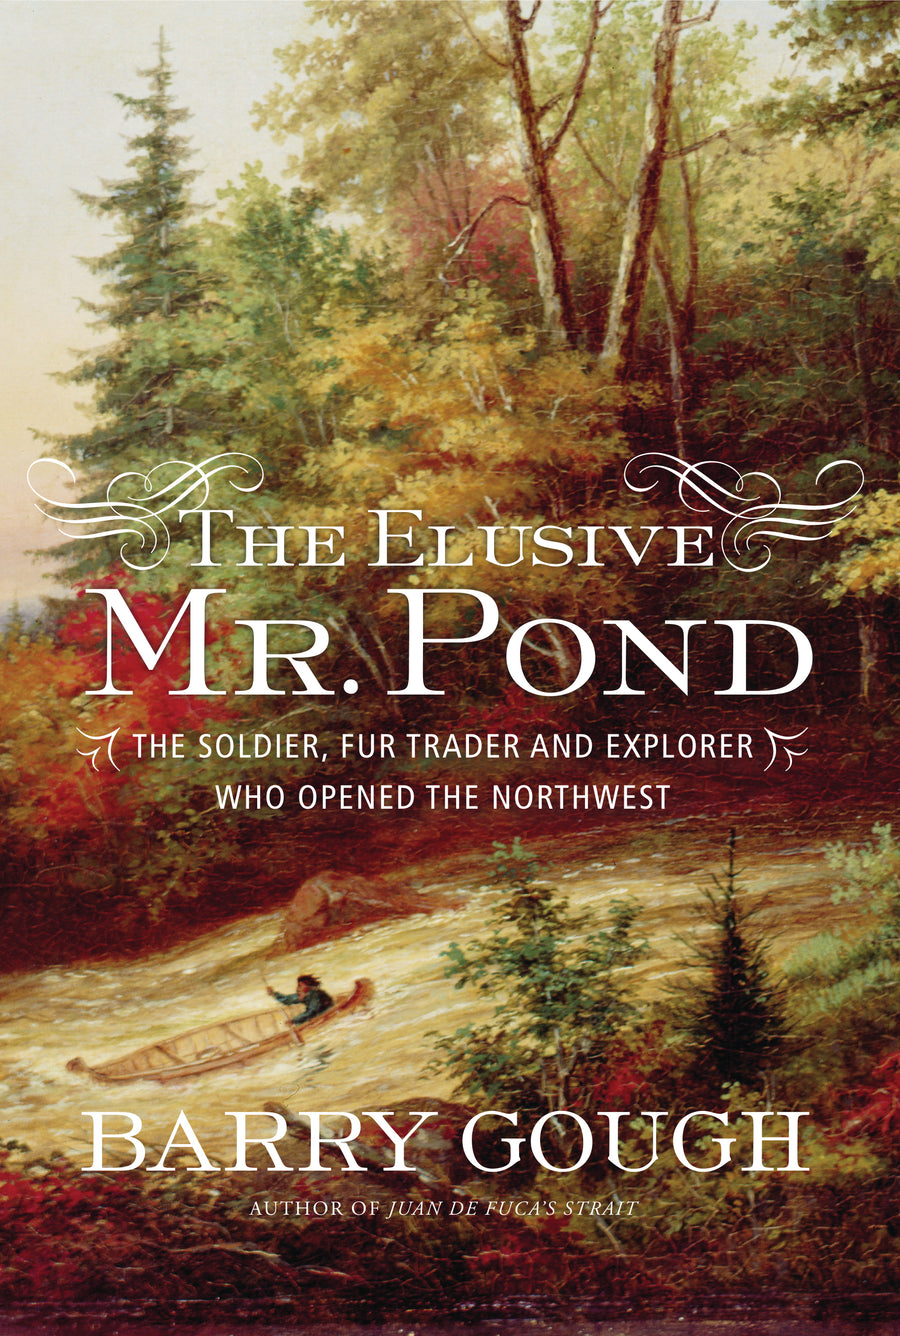 The Elusive Mr. Pond : The Soldier, Fur Trader and Explorer Who Opened the Northwest